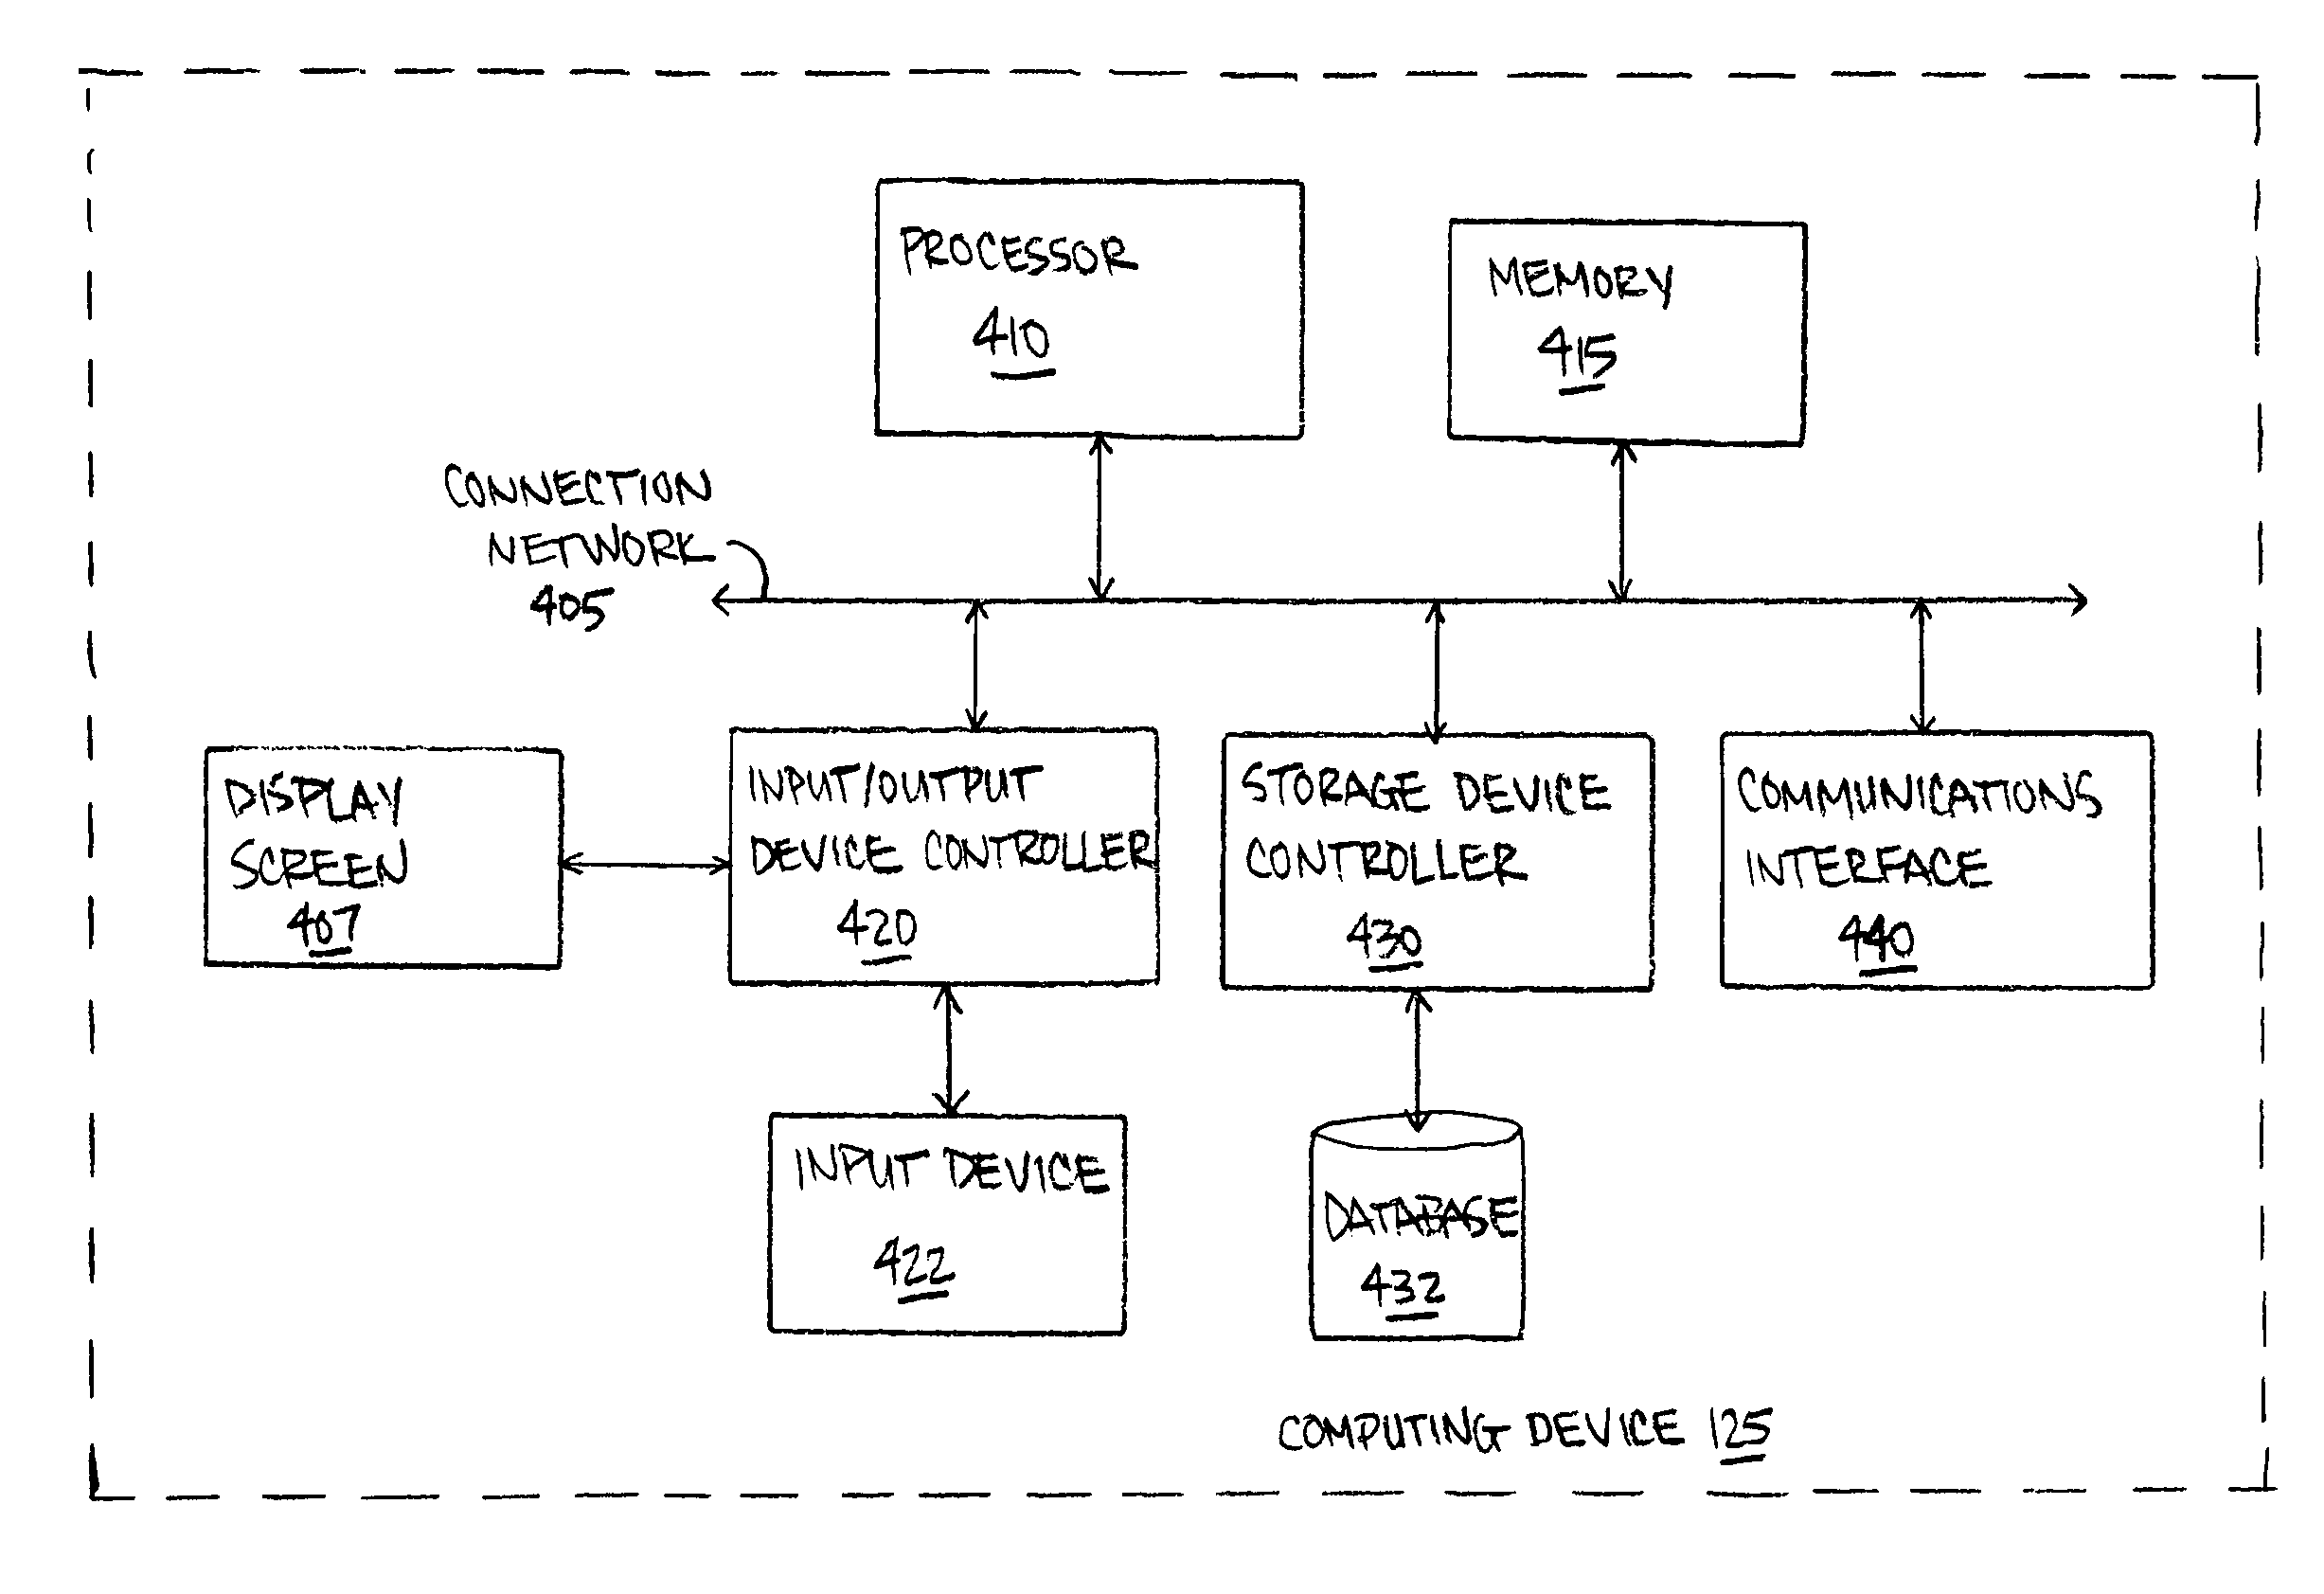 Wireless communication for diagnostic instrument